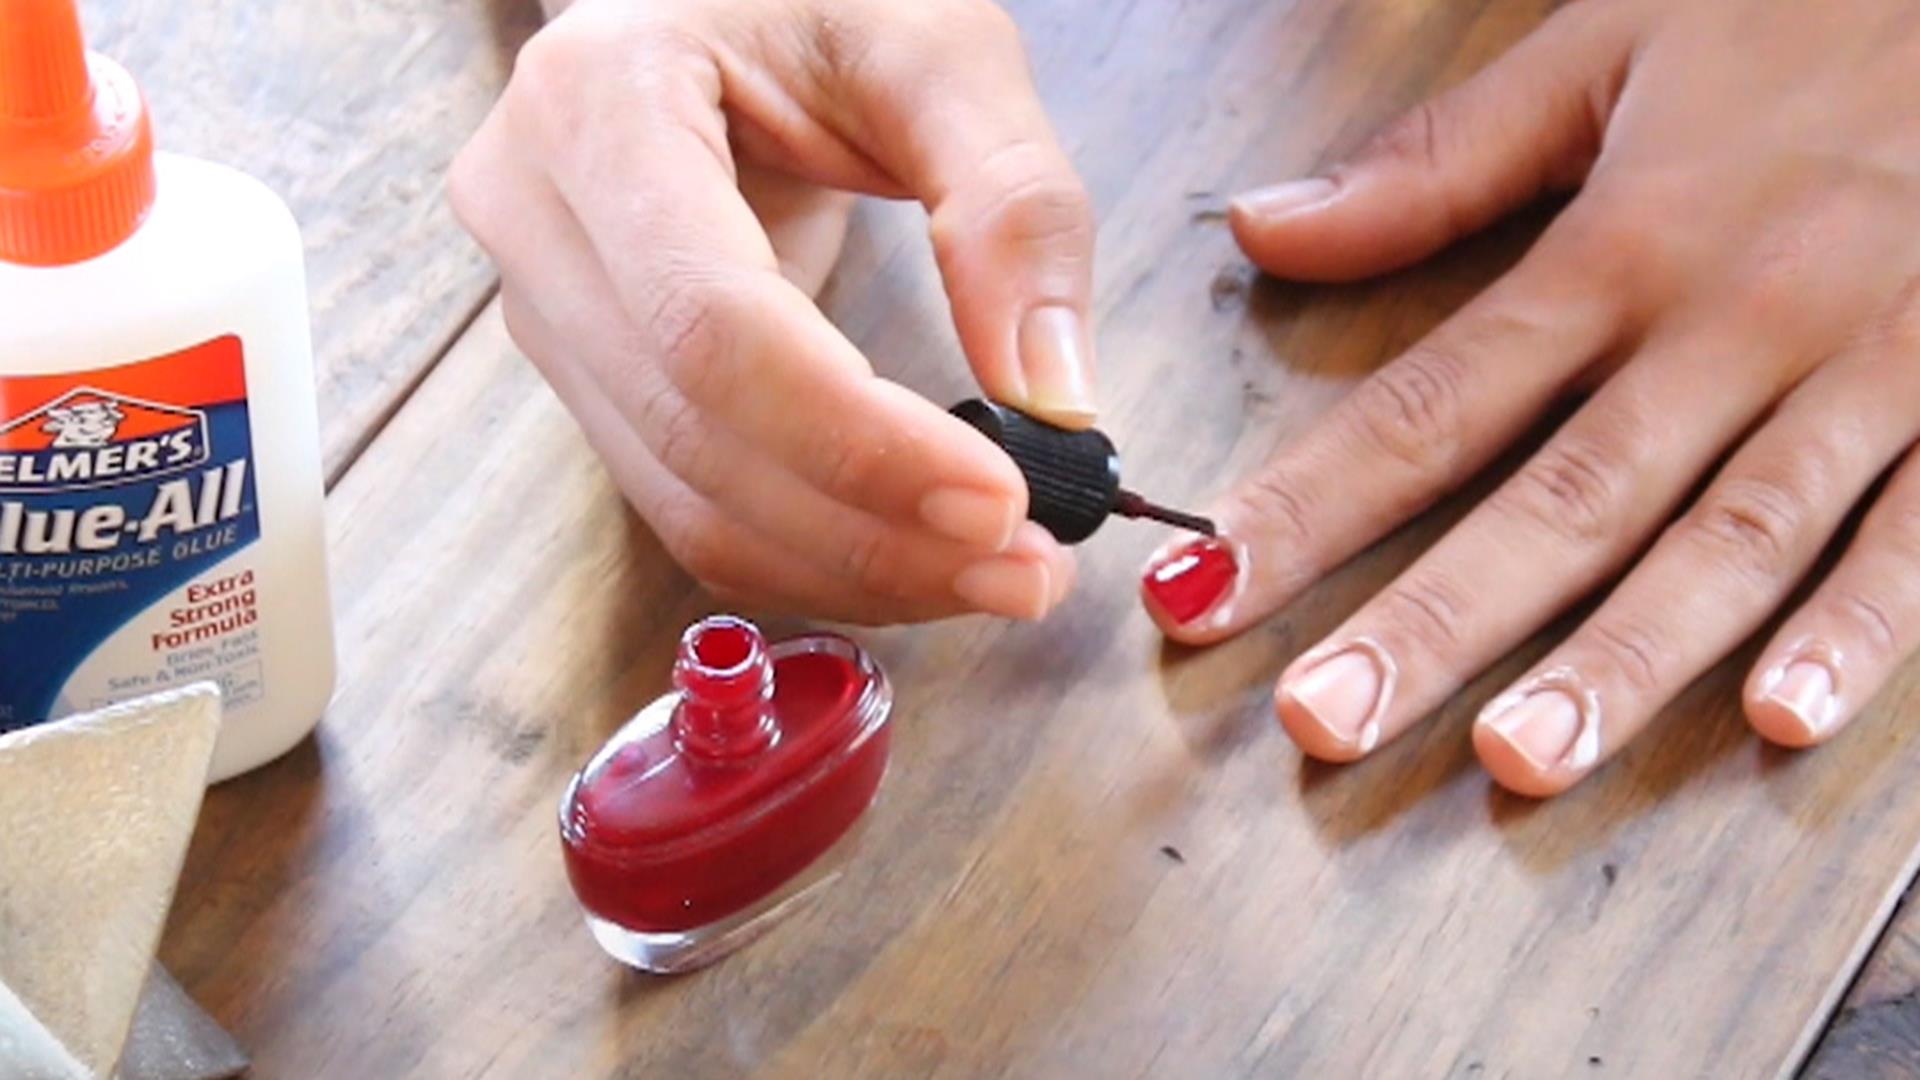 How To Prevent Nail Glue From Damaging Nails